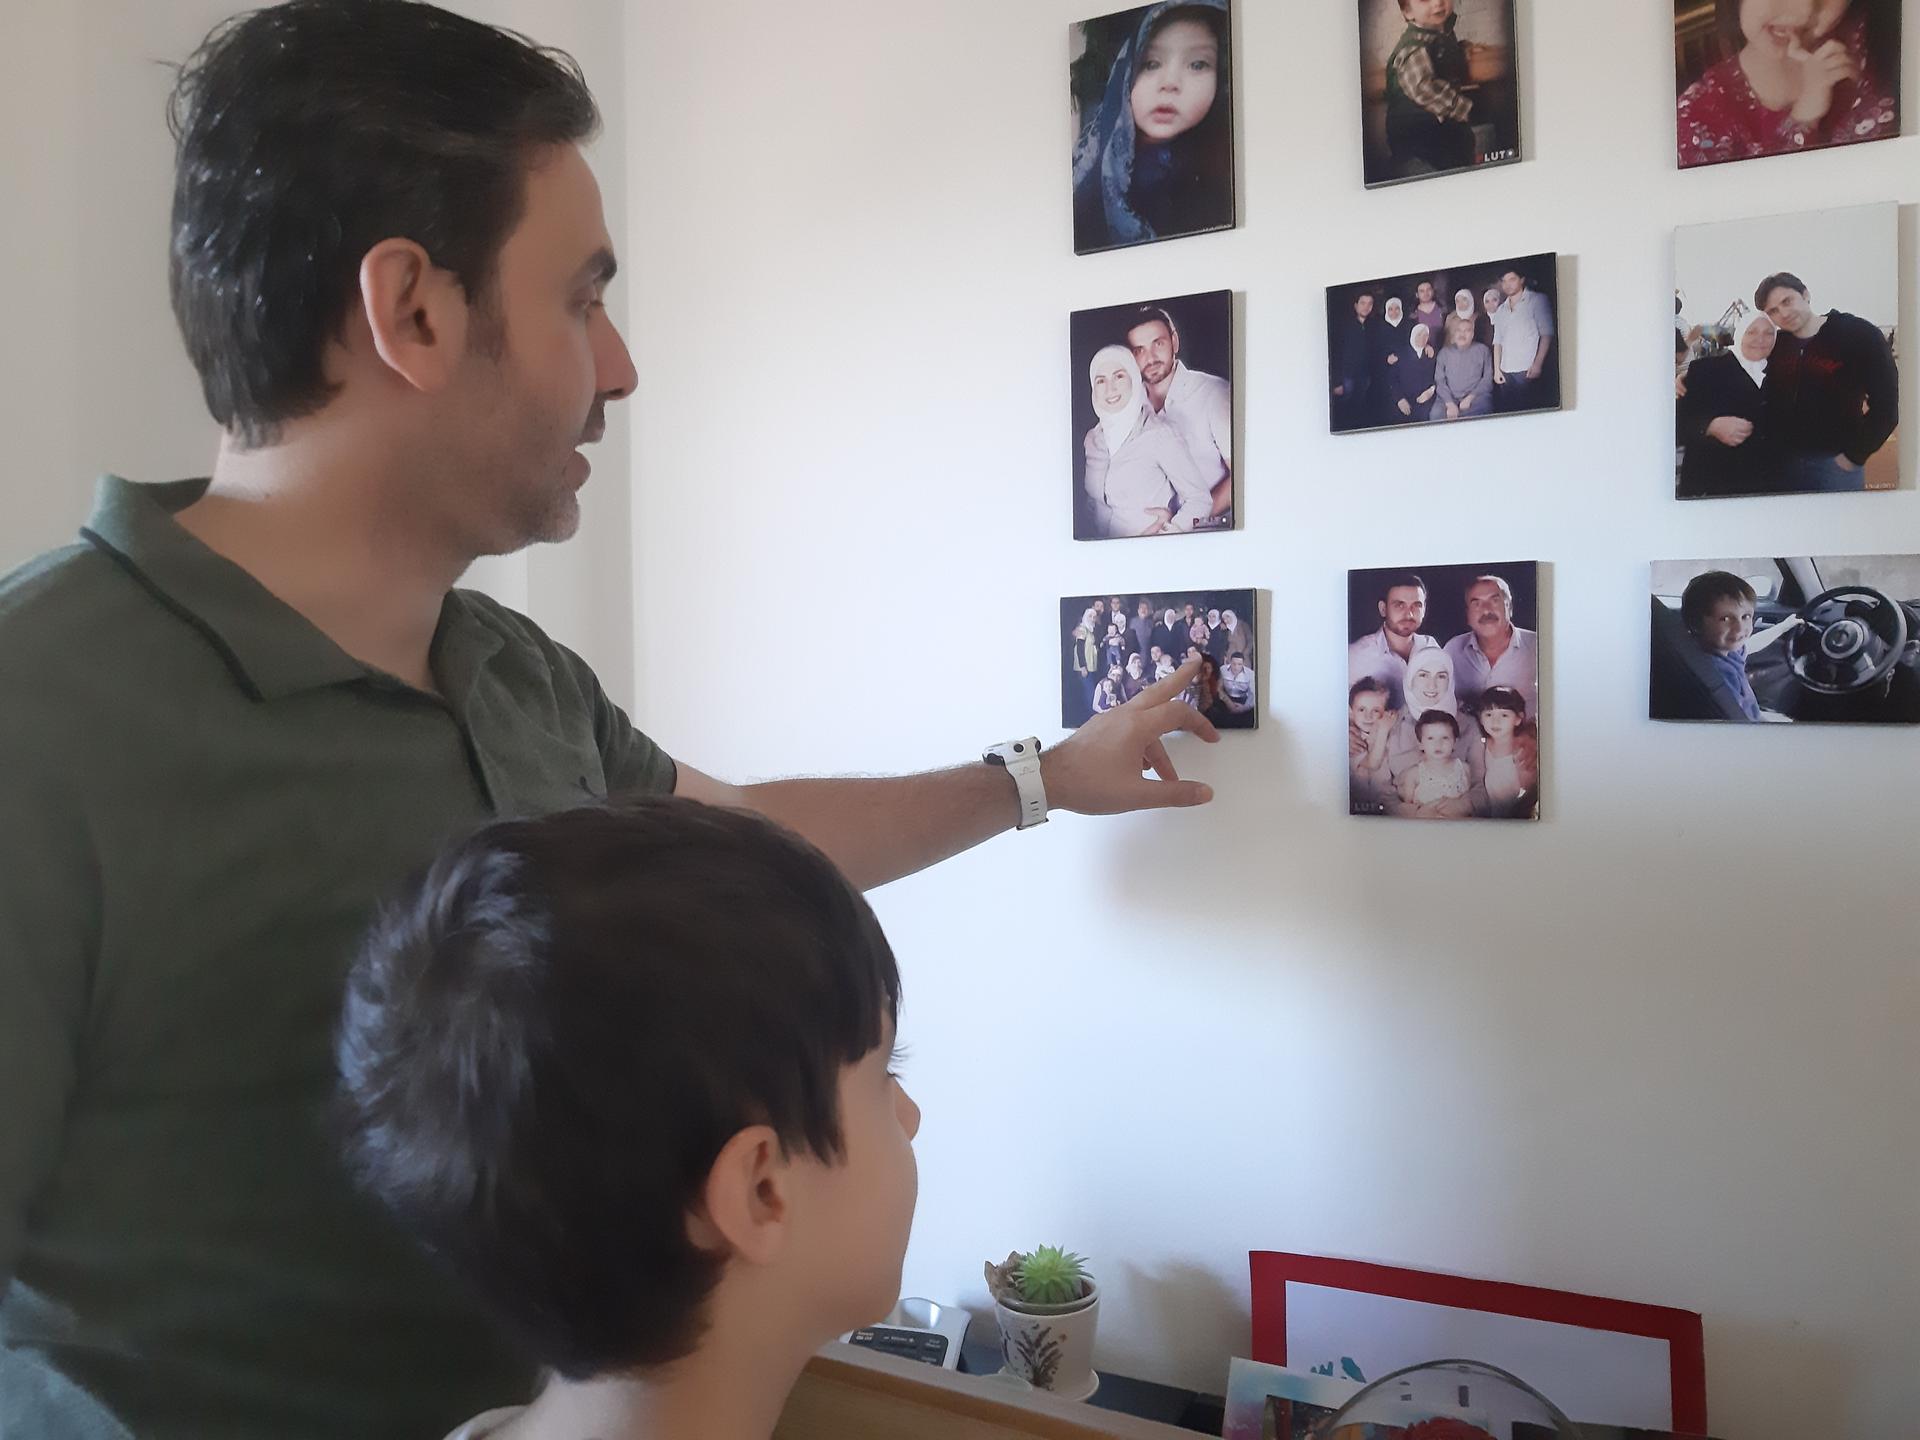 A man looks at photographs on the wall with his son